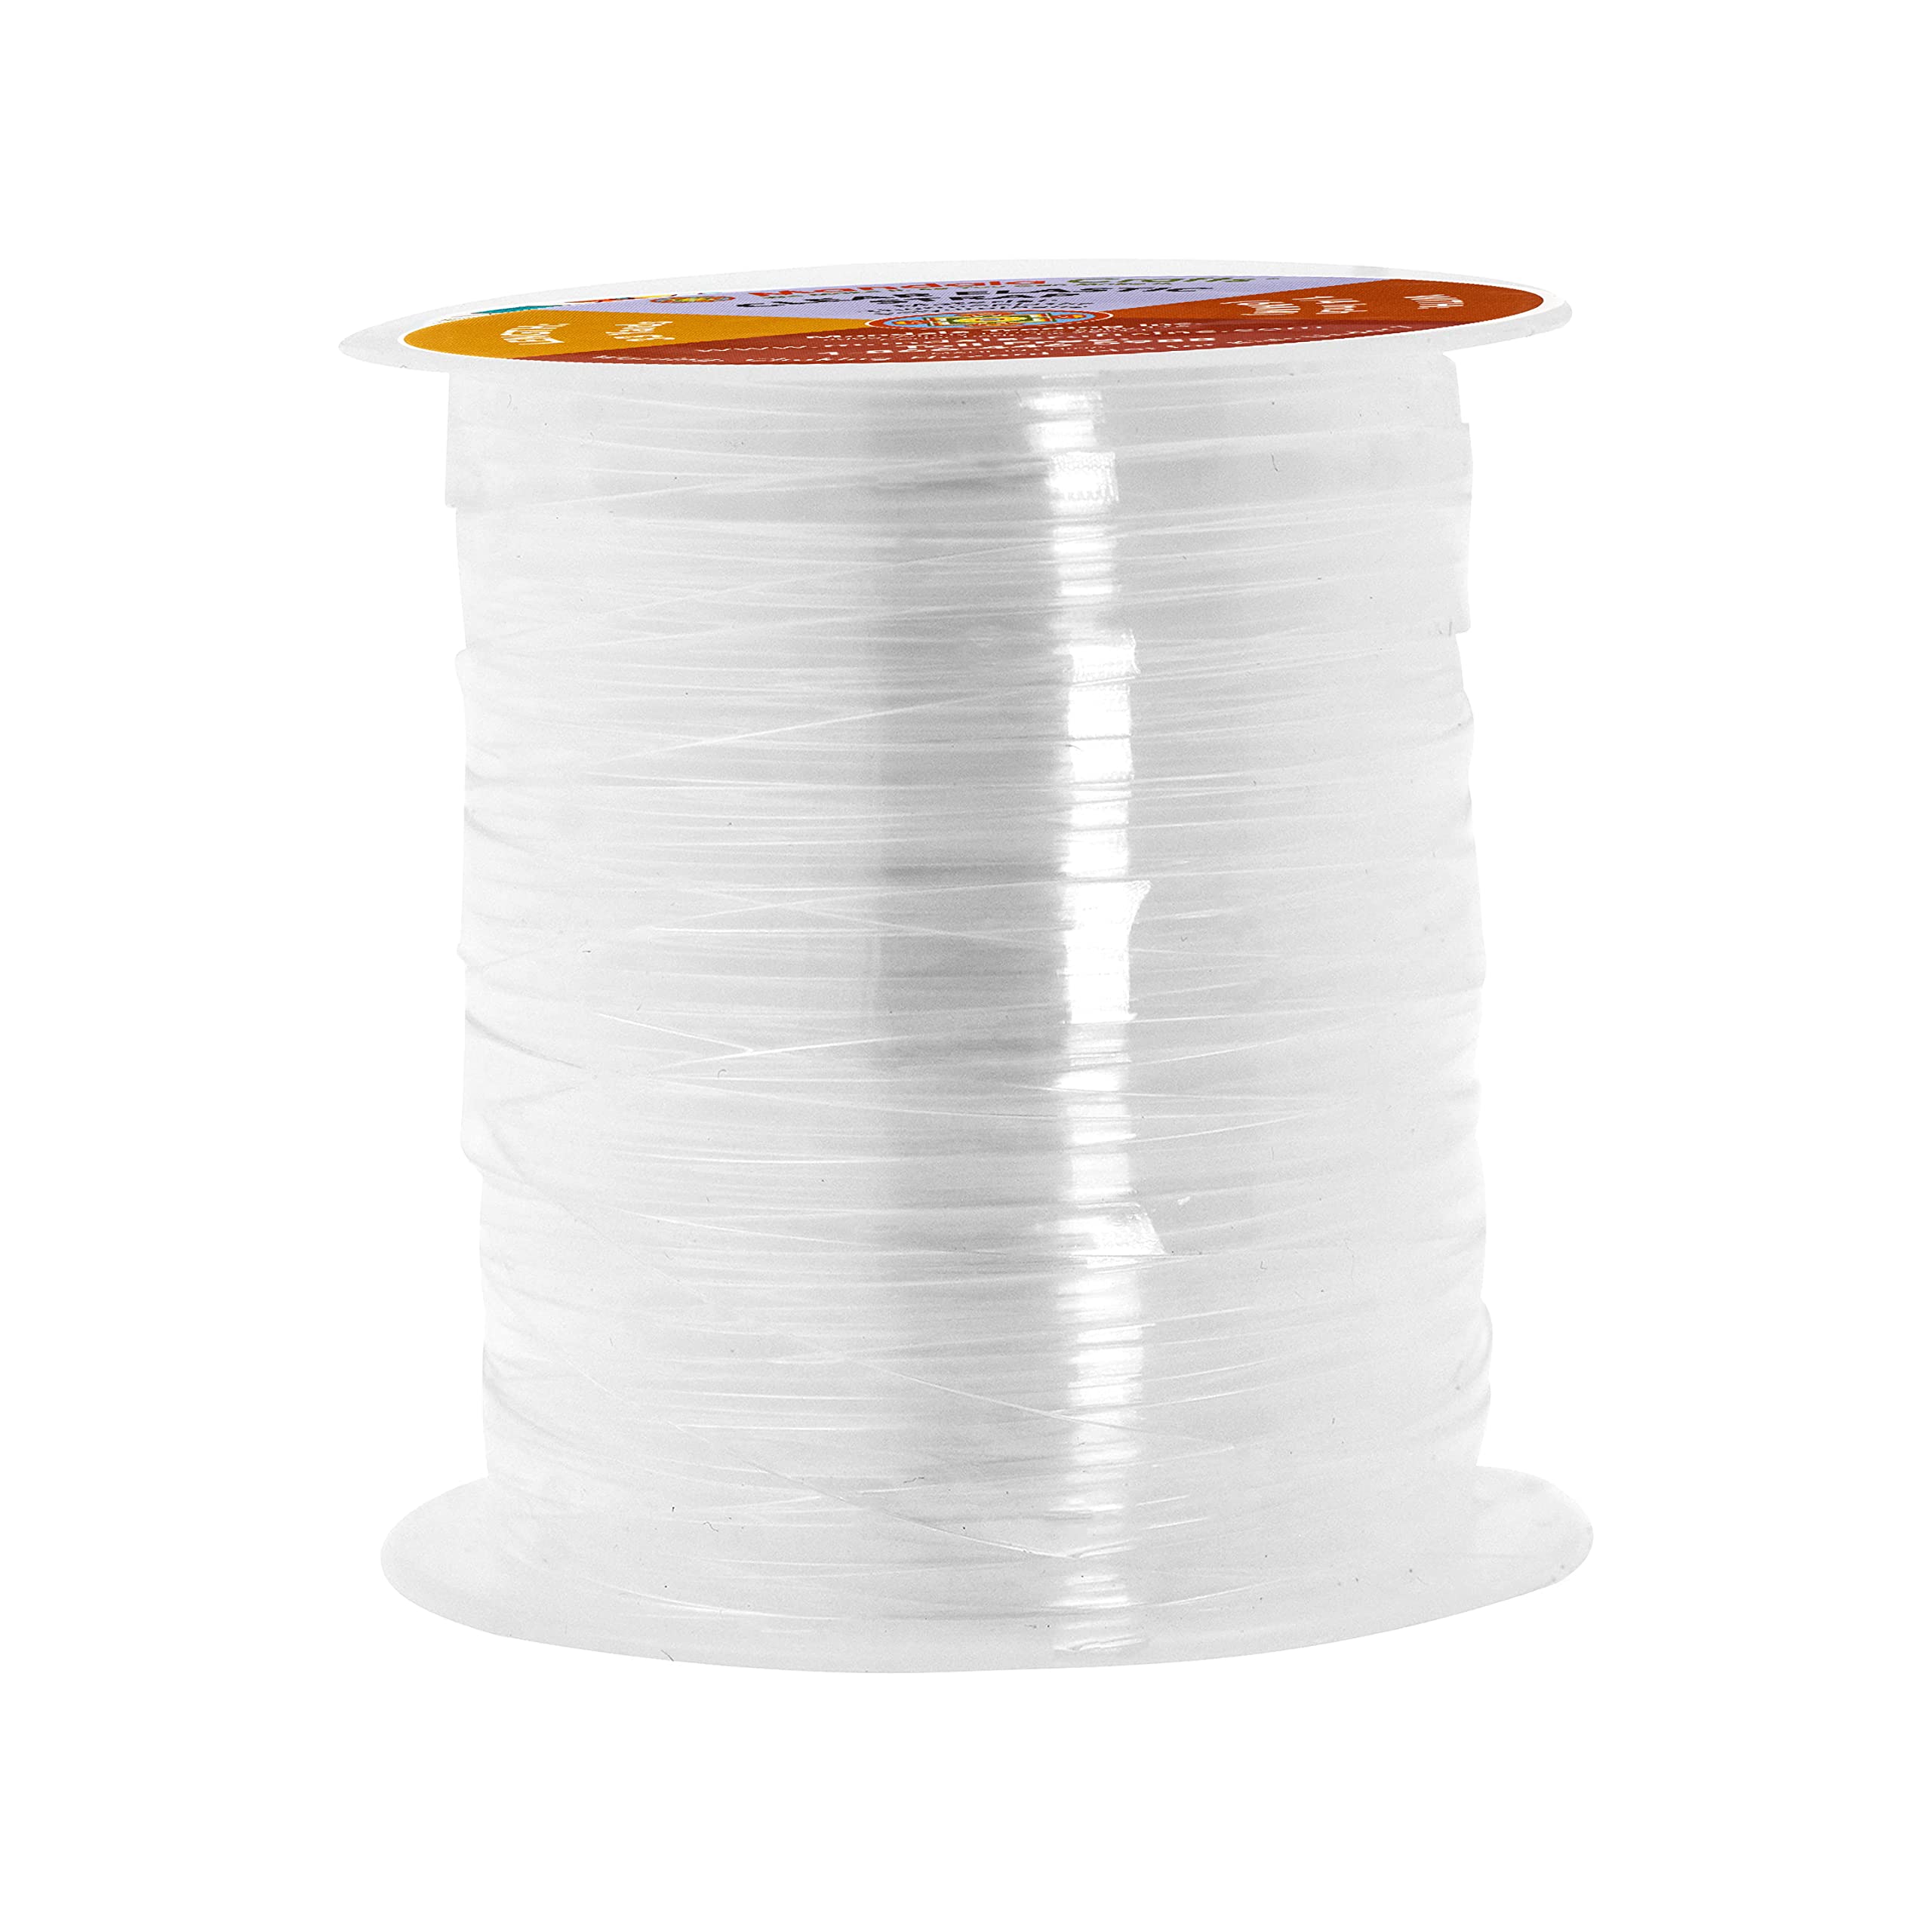 93 Yards Briaded Elastic Band 1/4 inch with Free Tape,White Heavy Stretch  High Elasticity Knit Spool for Sewing Crafts DIY